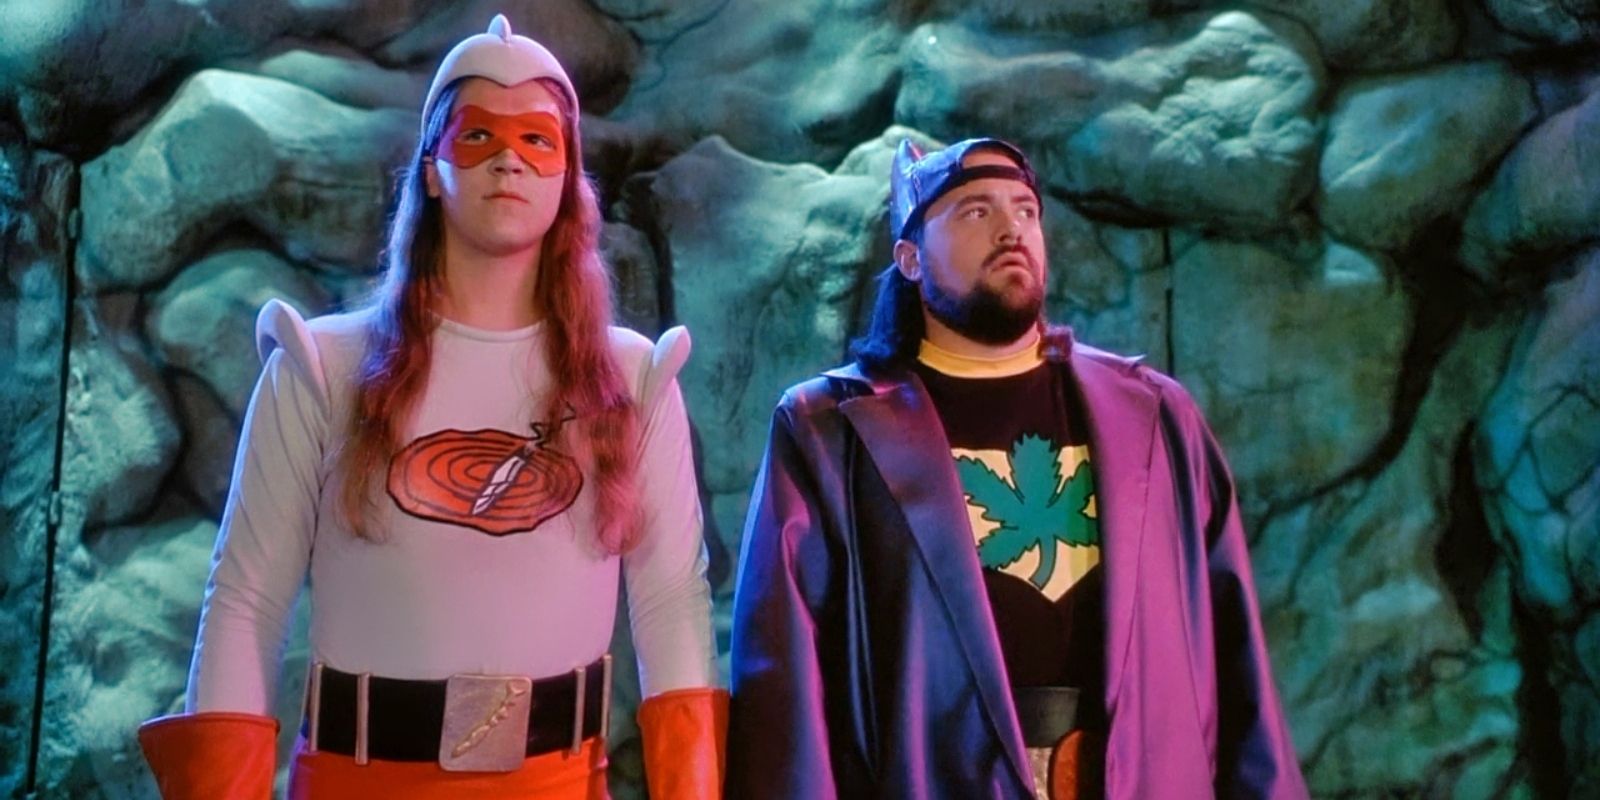 bluntman and chronic jay and silent bob strikes back